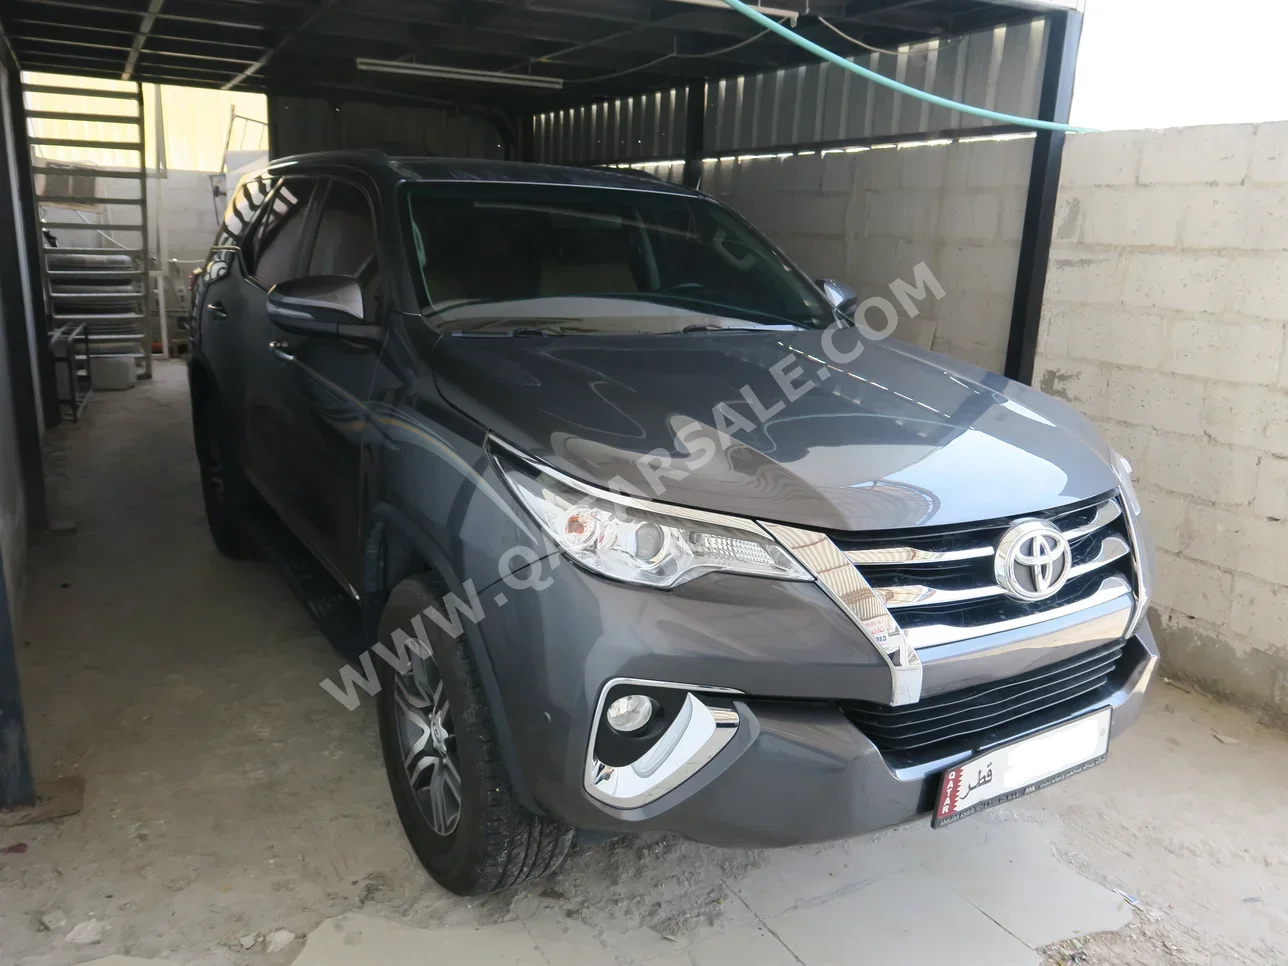 Toyota  Fortuner  2018  Automatic  110,000 Km  4 Cylinder  Four Wheel Drive (4WD)  SUV  Gray